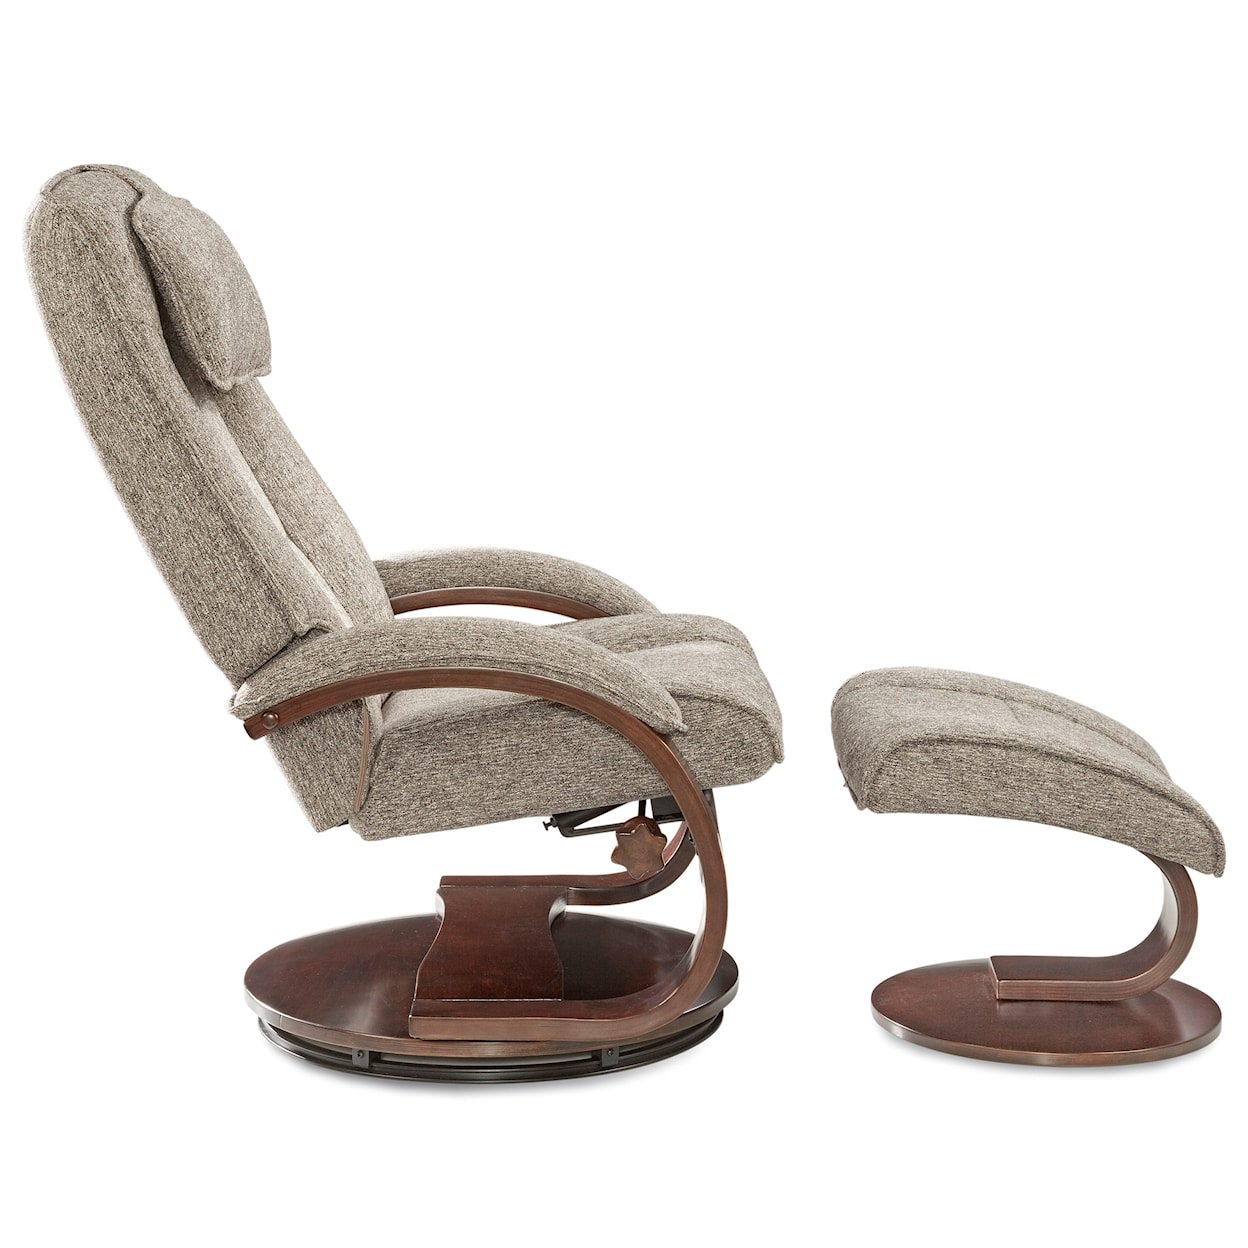 Mac Motion Chairs 14244 Bergen Chair and Ottoman